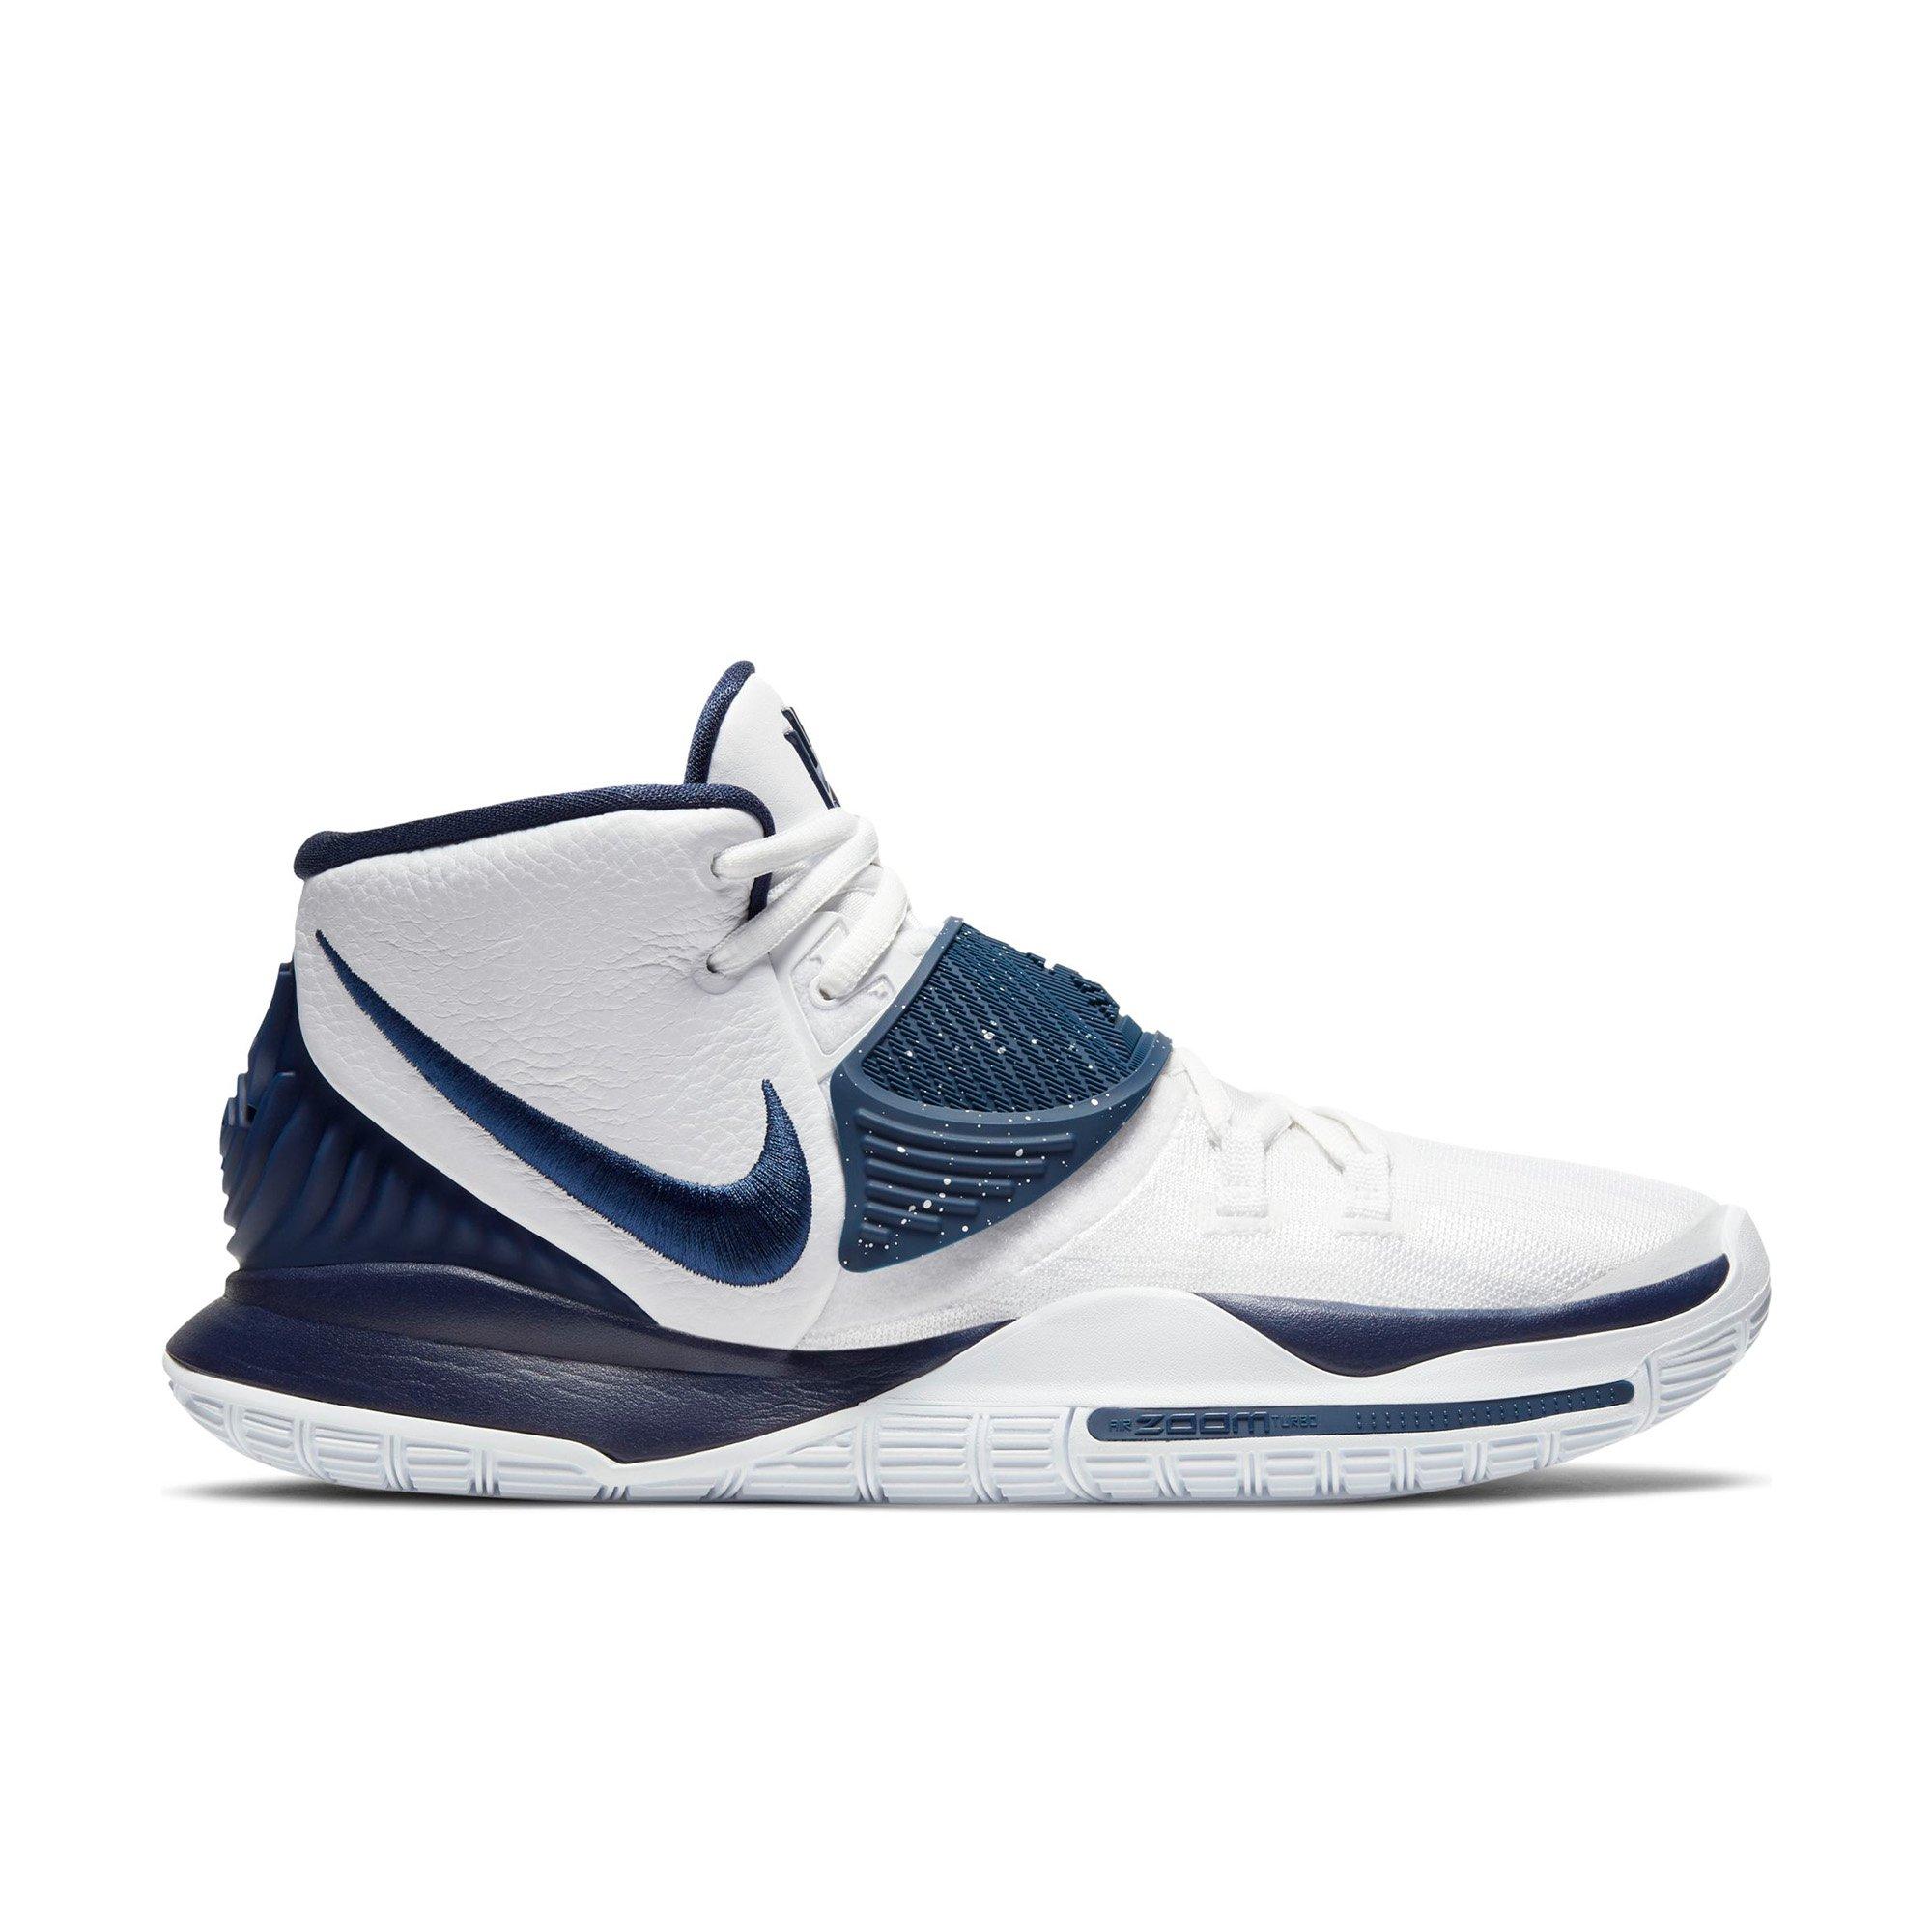 white and navy blue nike basketball shoes